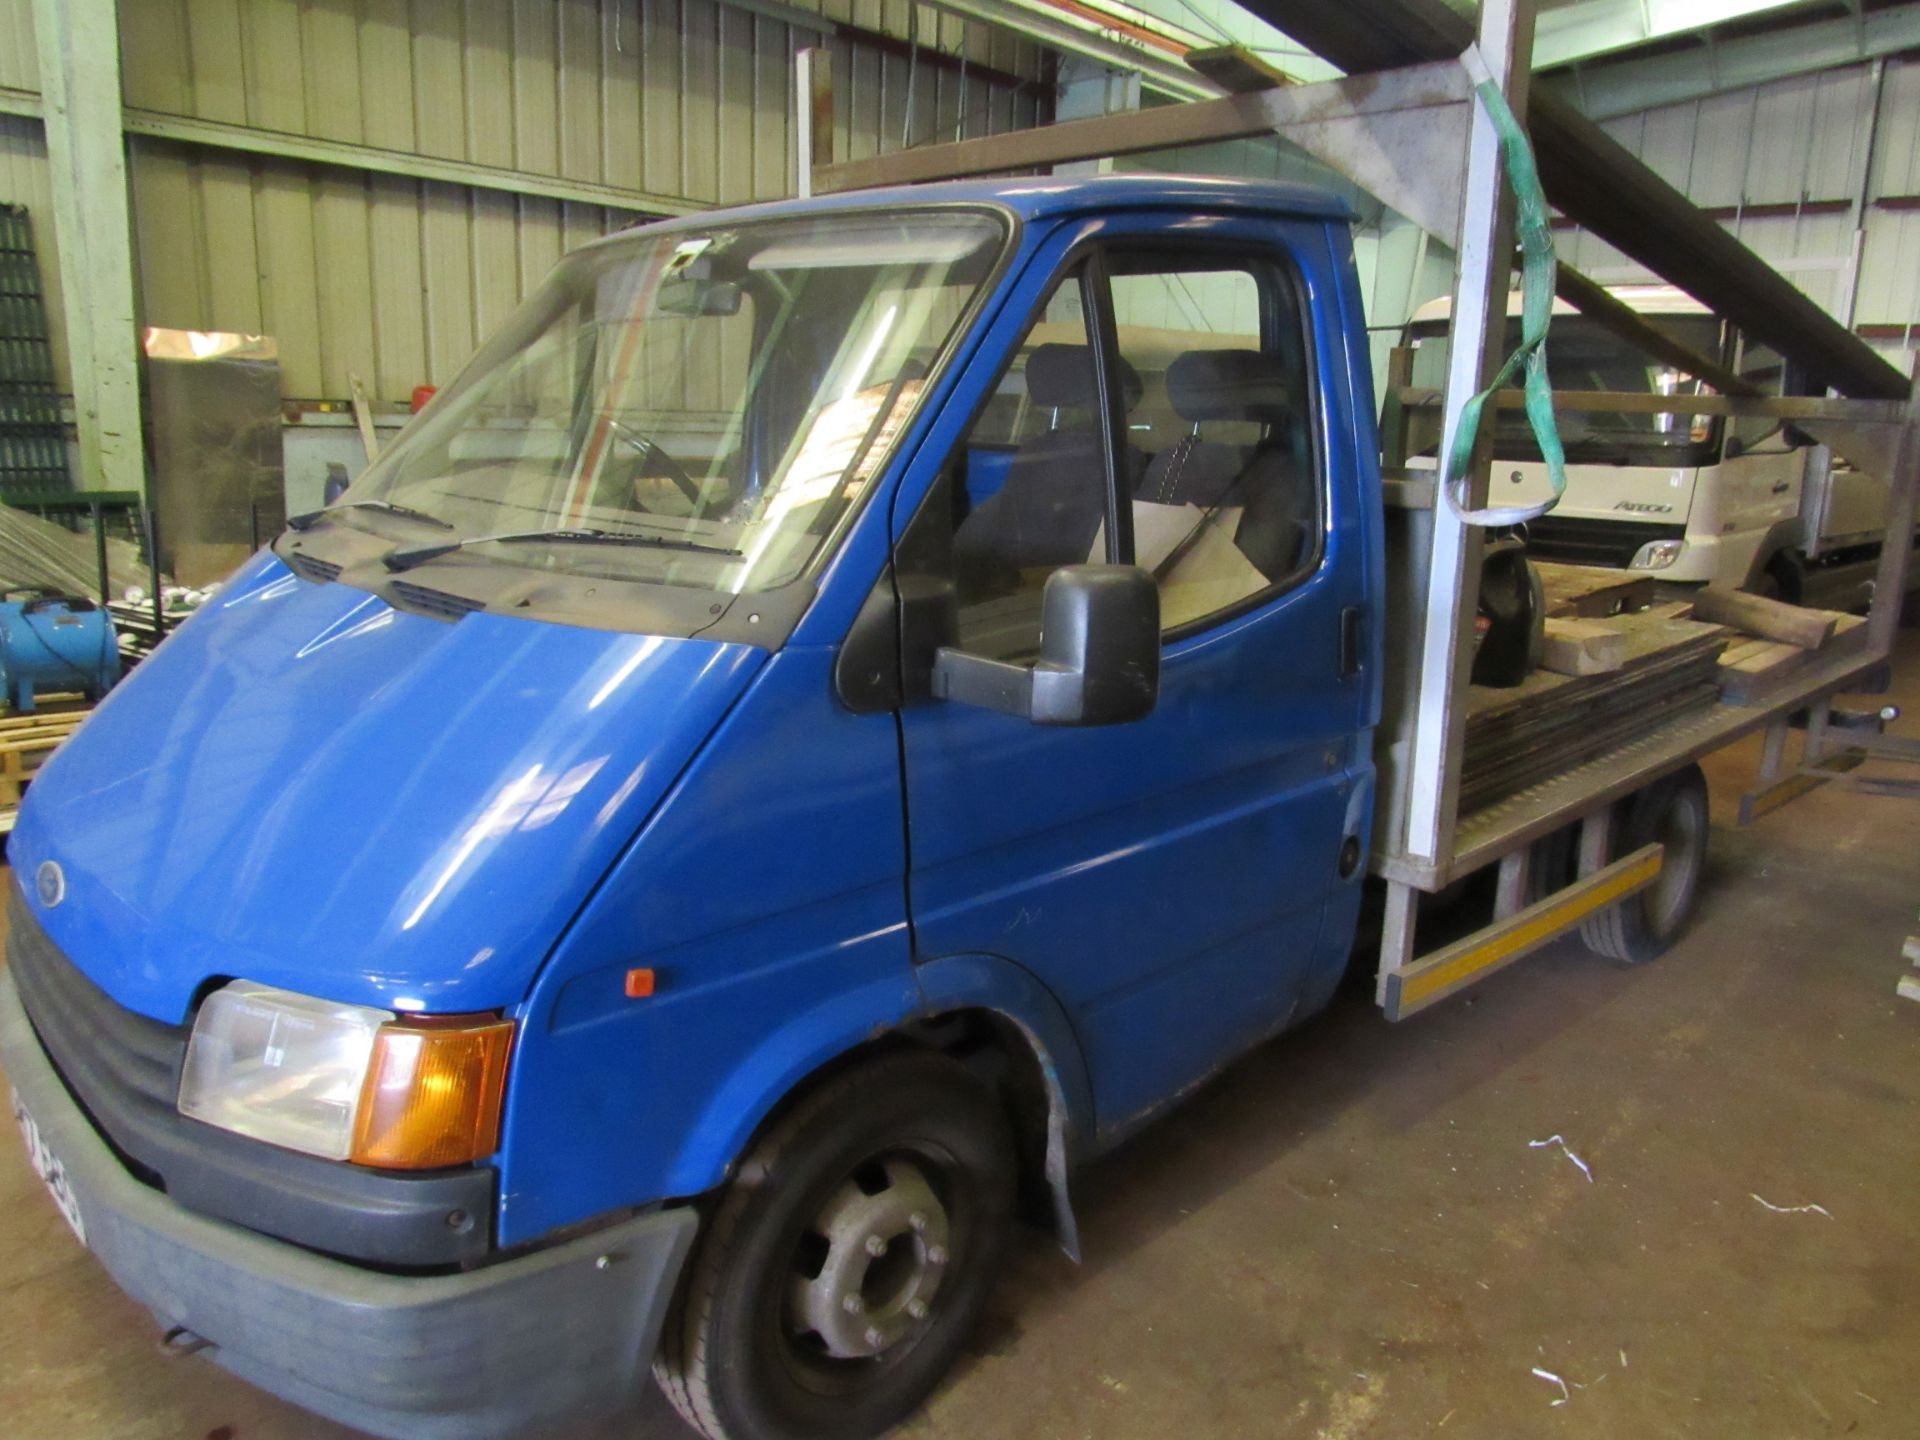 Ford Transit Heavy-Duty Flat Bed - Image 3 of 11